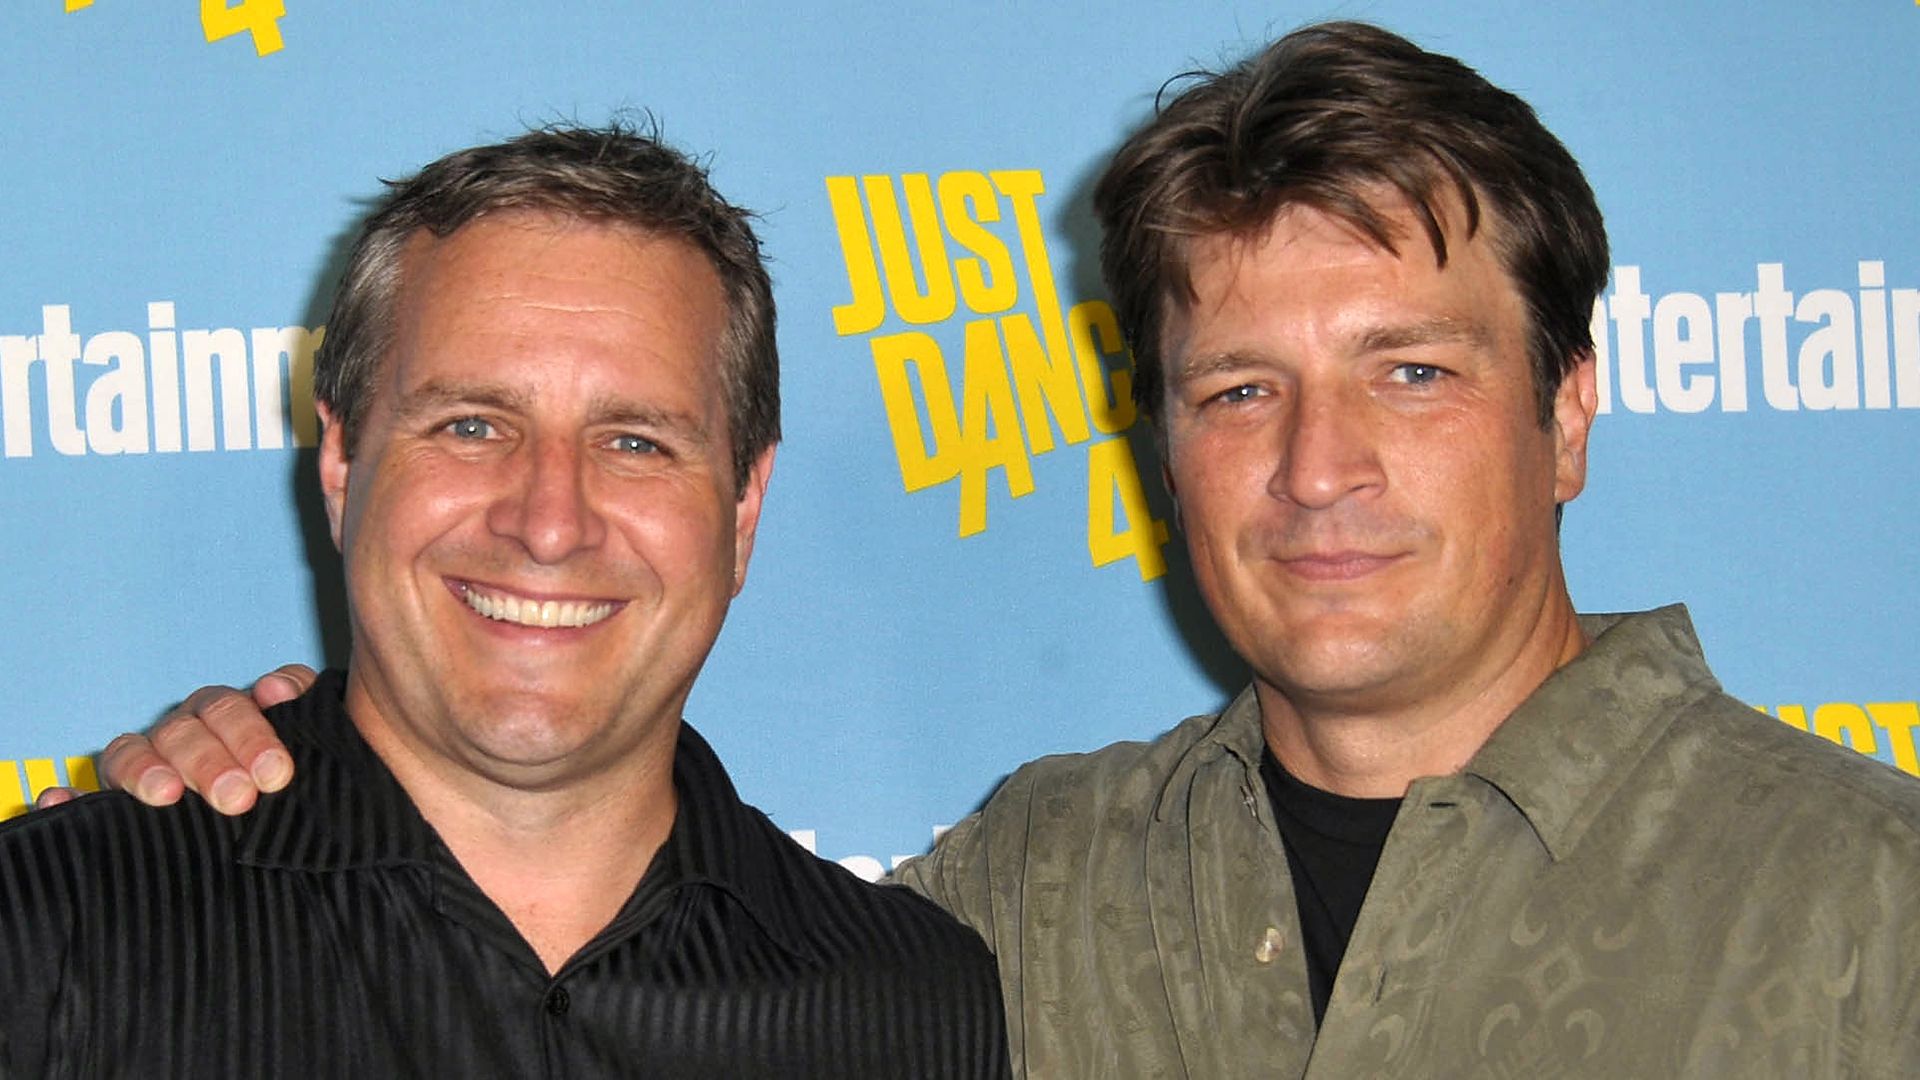 Nathan and Jeff Fillion pose together at Entertainment Weekly's Comic-Con Celebration in 2012